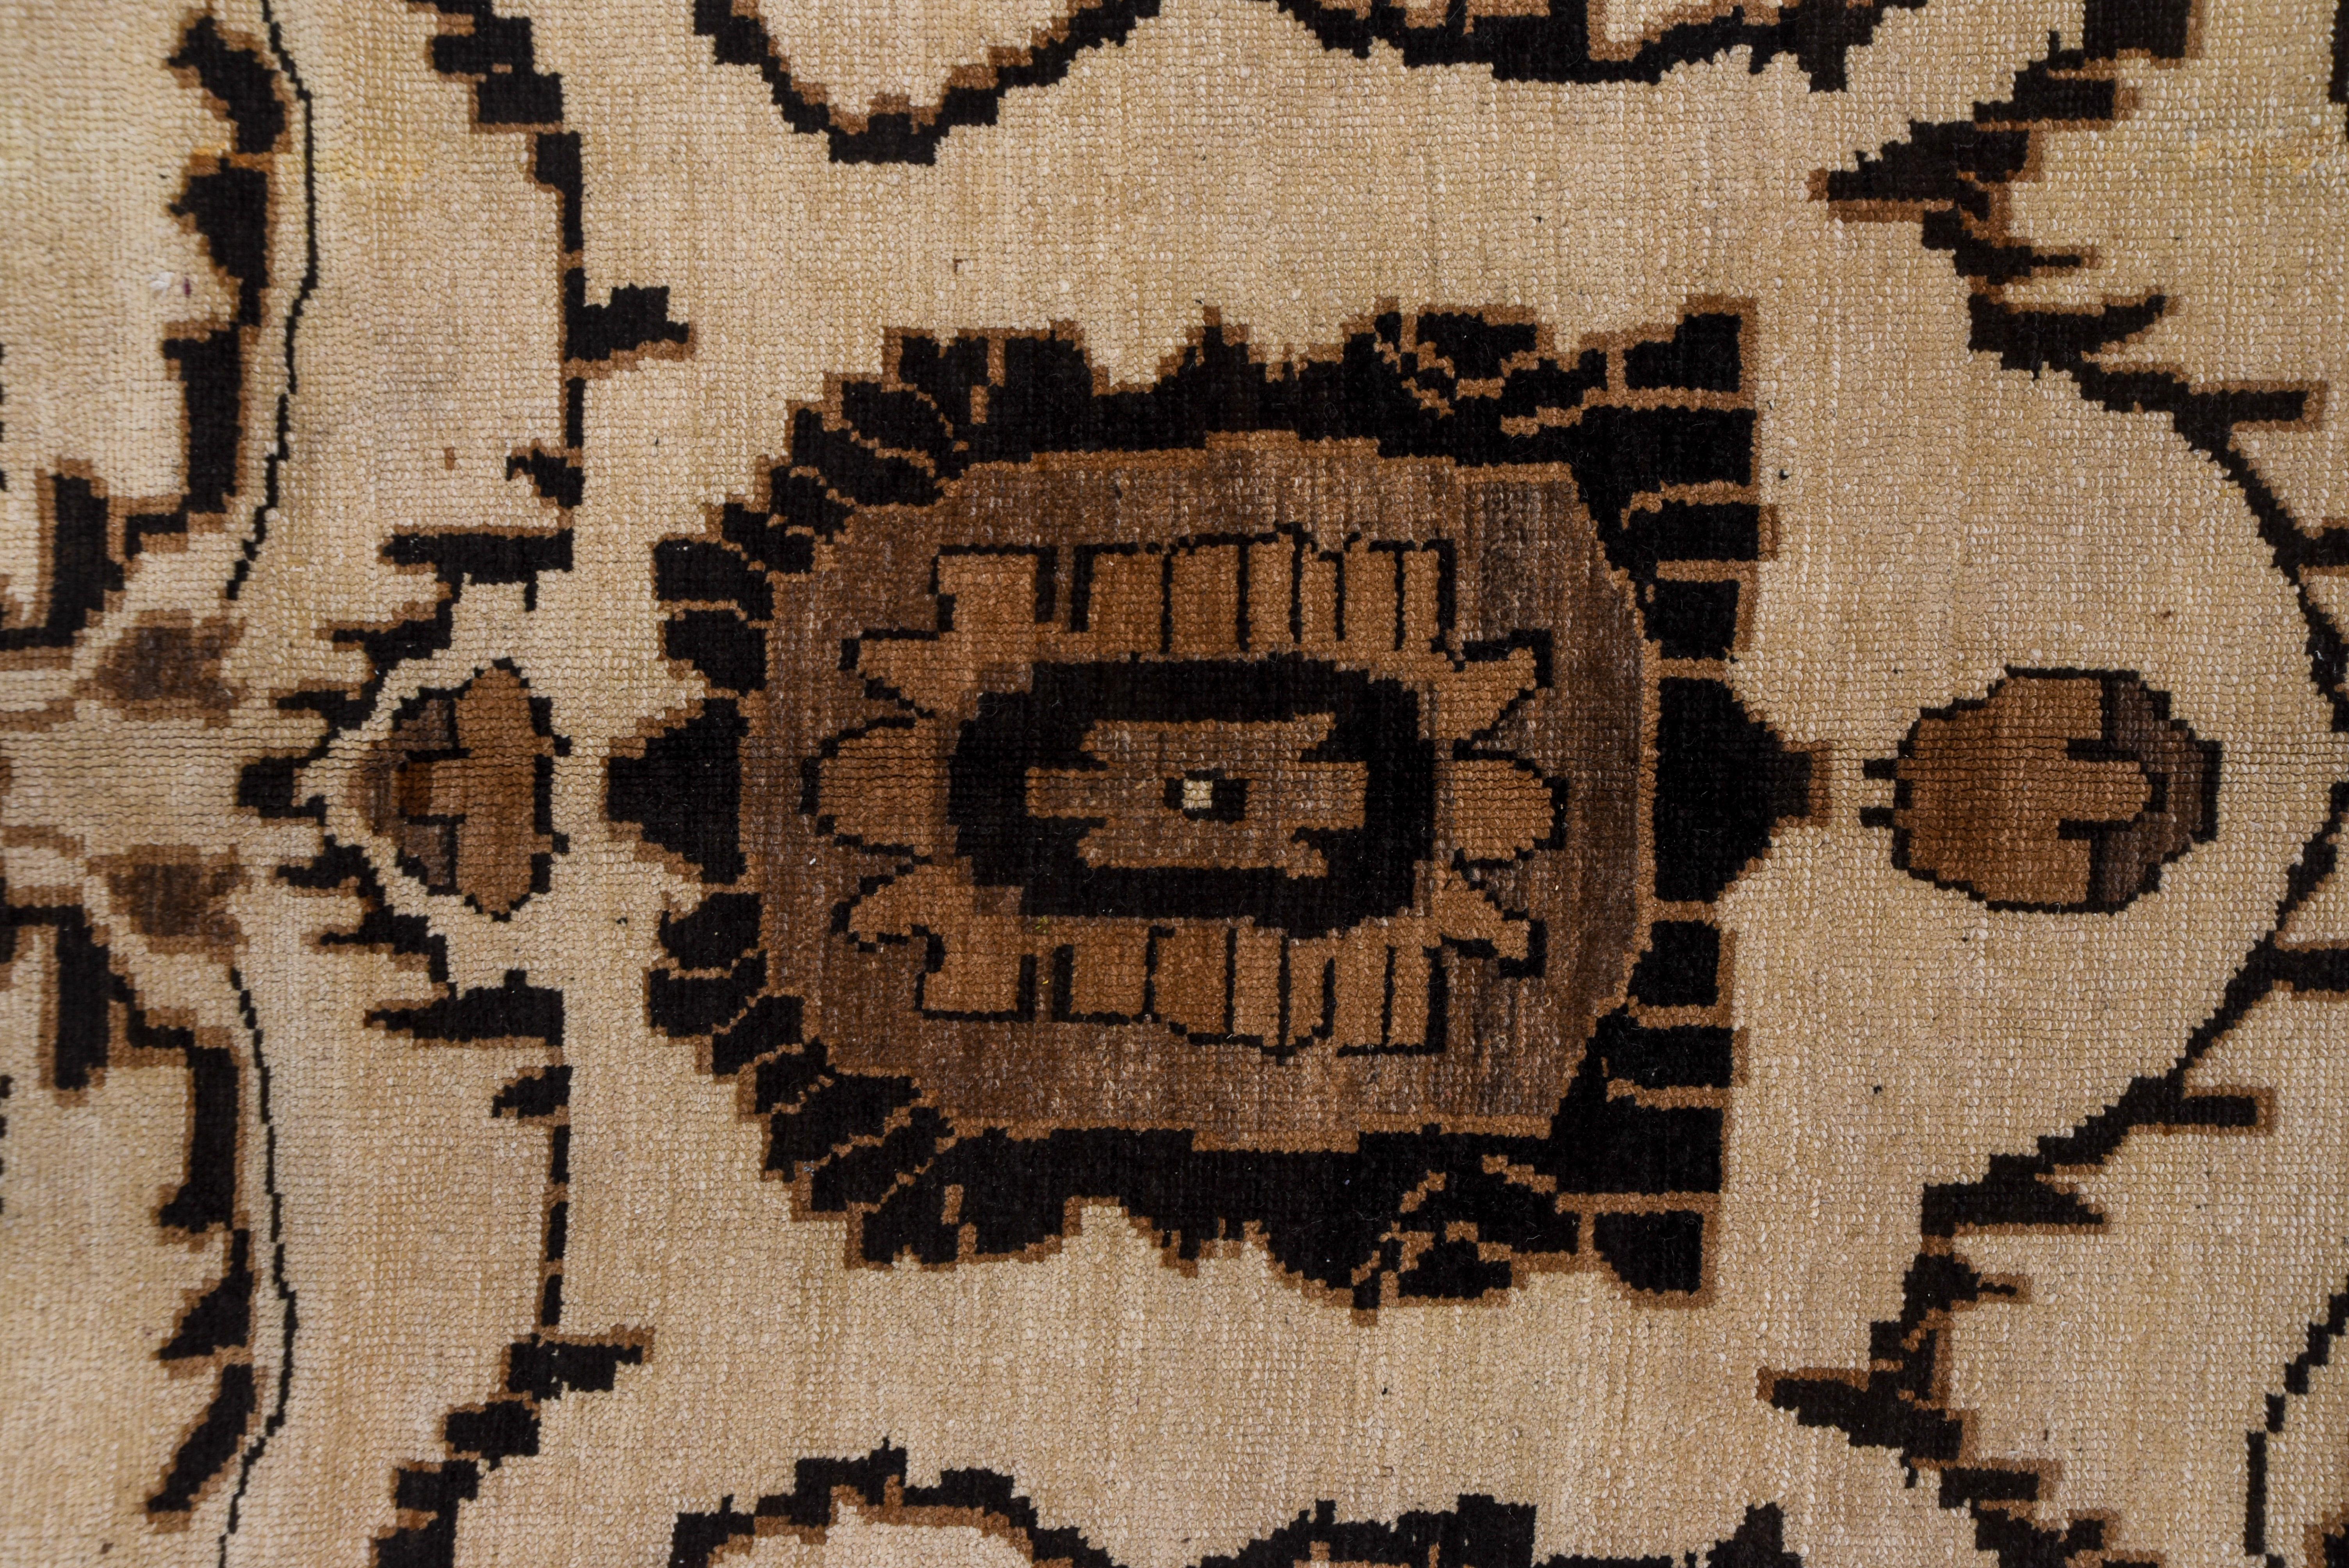 Mid-20th Century Rustic Turkish Kars Rug, Black Innter Field, Cream Outer Field In Good Condition For Sale In New York, NY